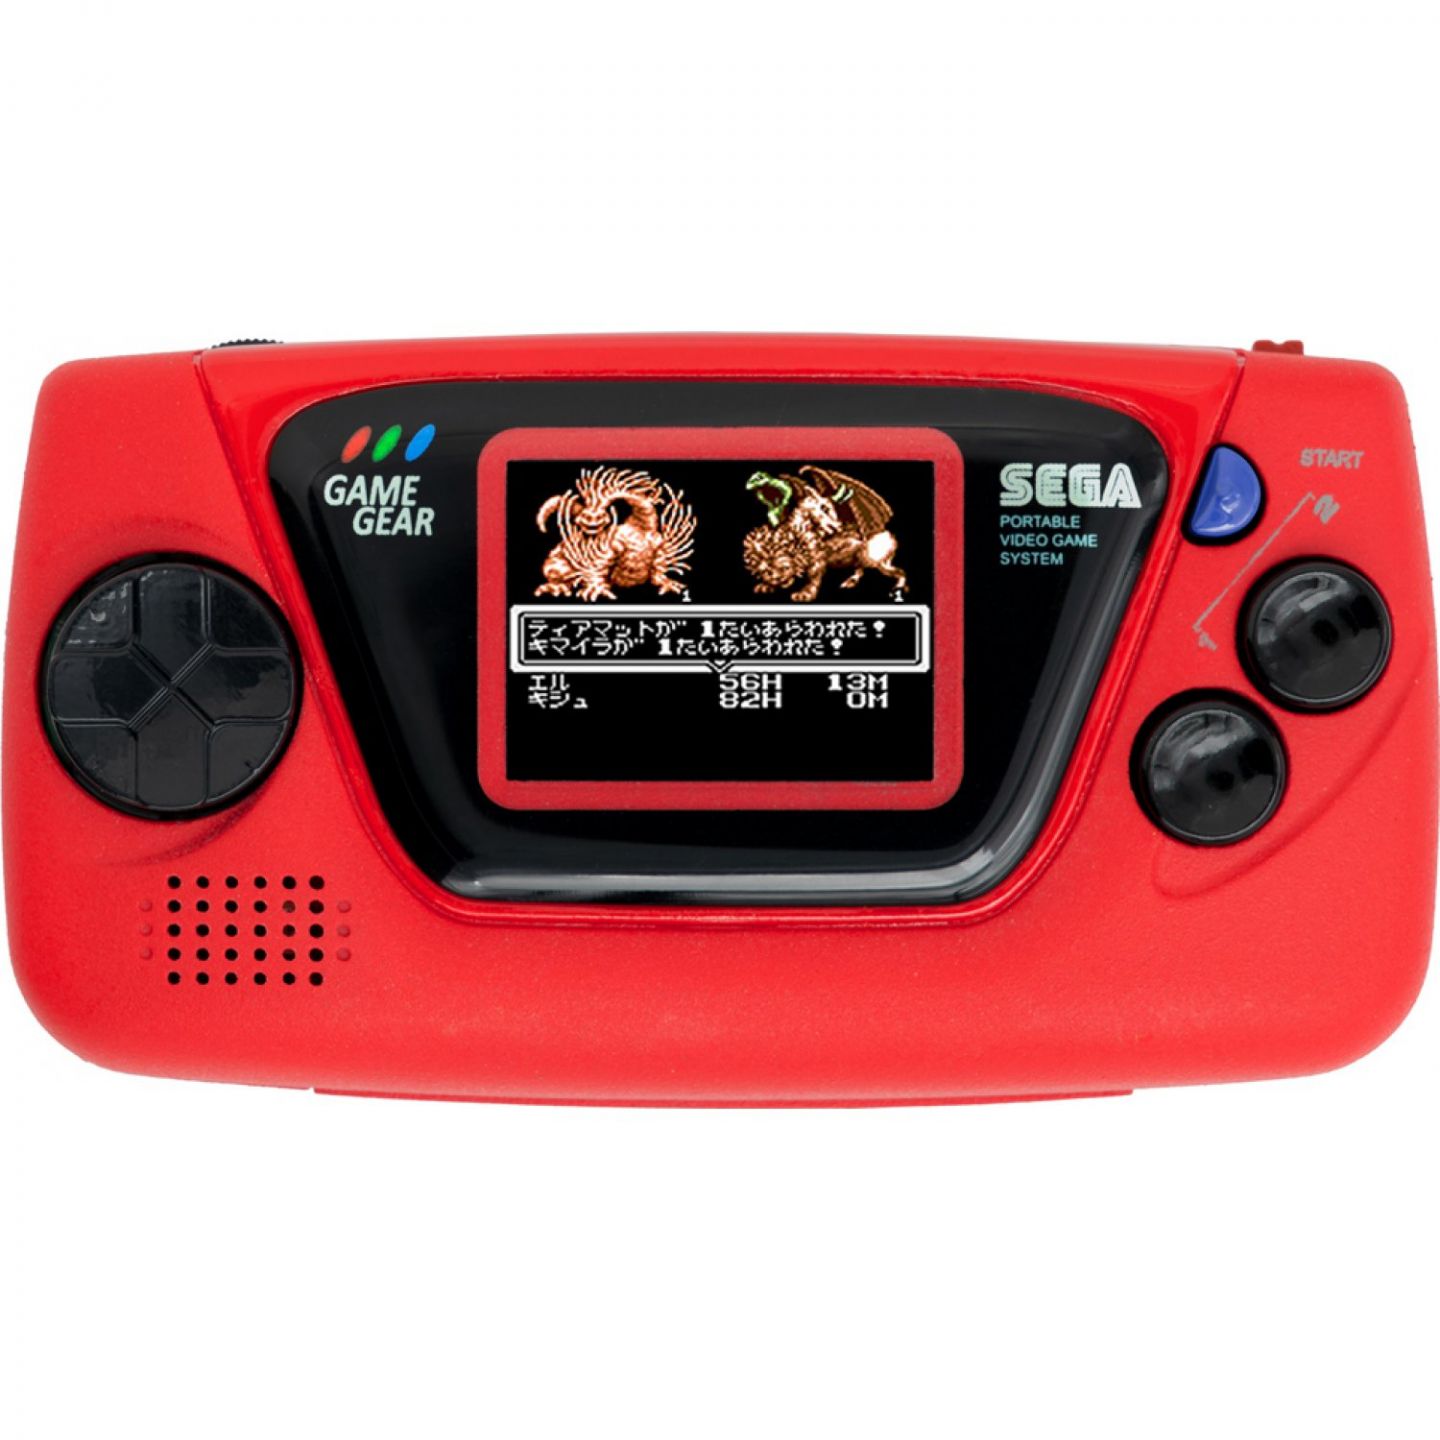 Ultimate game gear. Сега Гир. Game Gear Micro. Sega game Gear. Sega game Gear Micro.